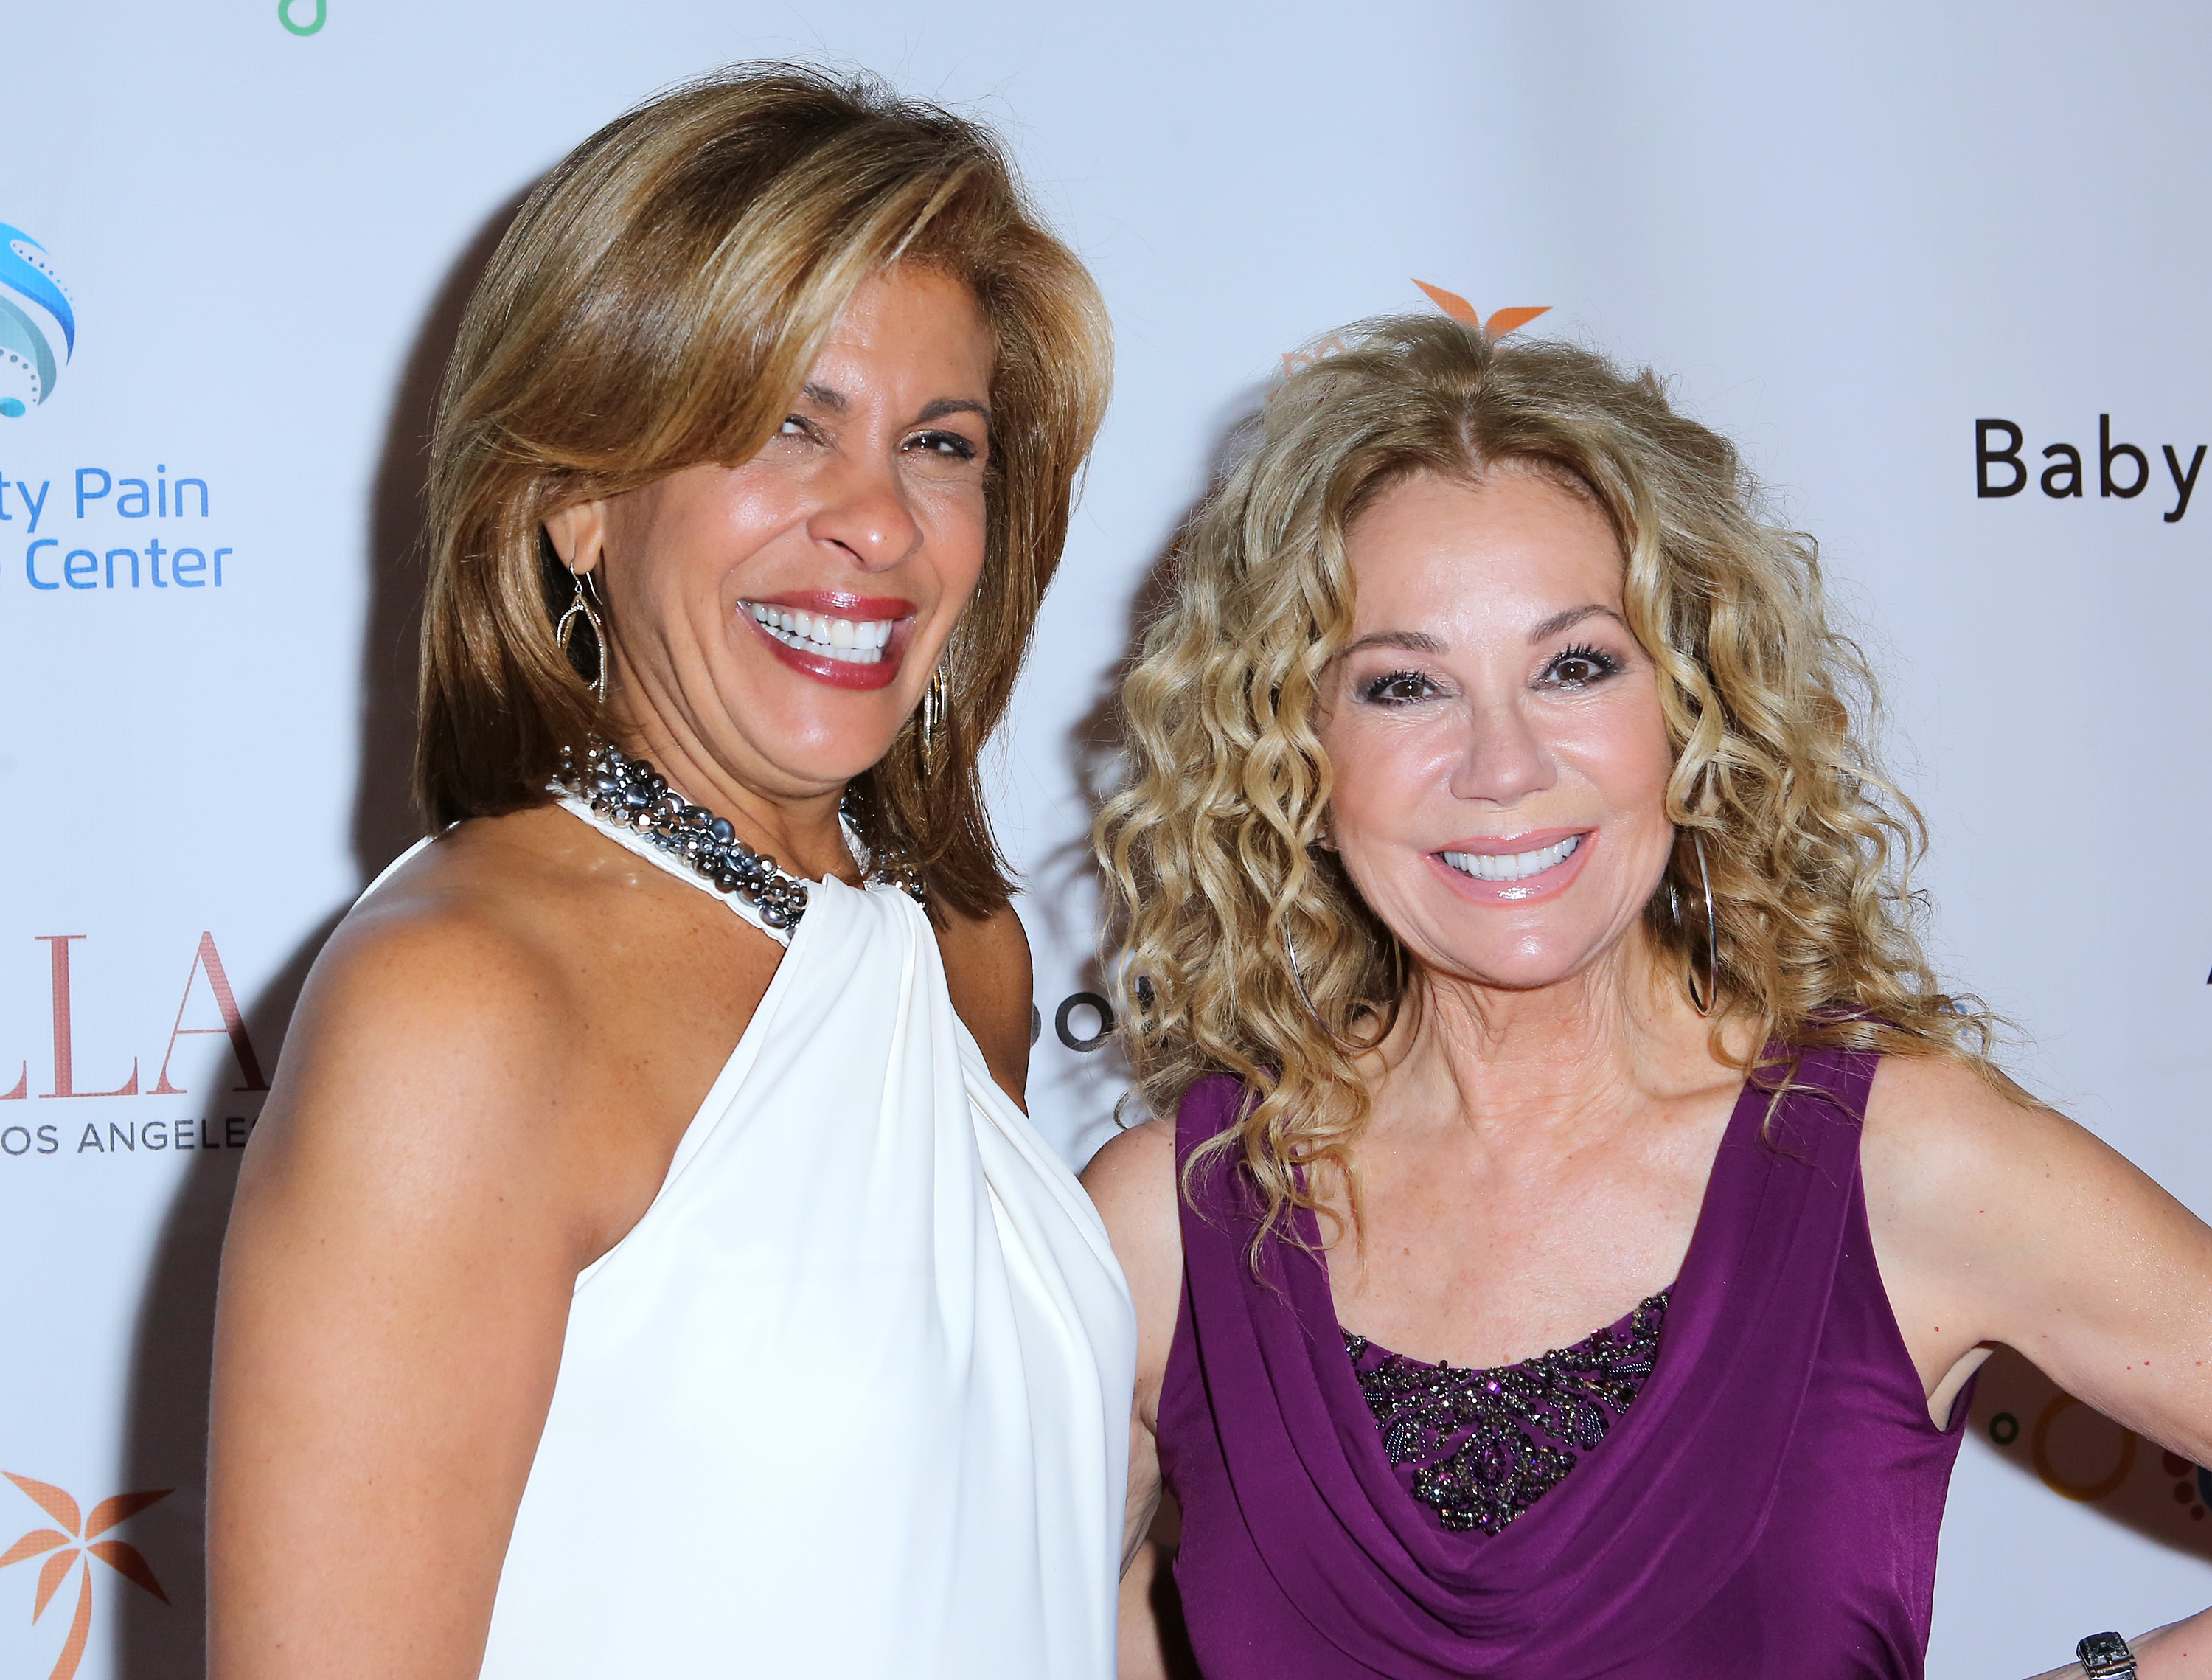 NEW YORK, NY - DECEMBER 06:  Hoda Kotb and Kathie Lee Gifford appear to celebrate the BELLA New York Holiday Issue Cover Party and Holiday Shopping Event on December 6, 2016 in New York City.  (Photo by Donna Ward/Getty Images) (Donna Ward&mdash;Getty Images)